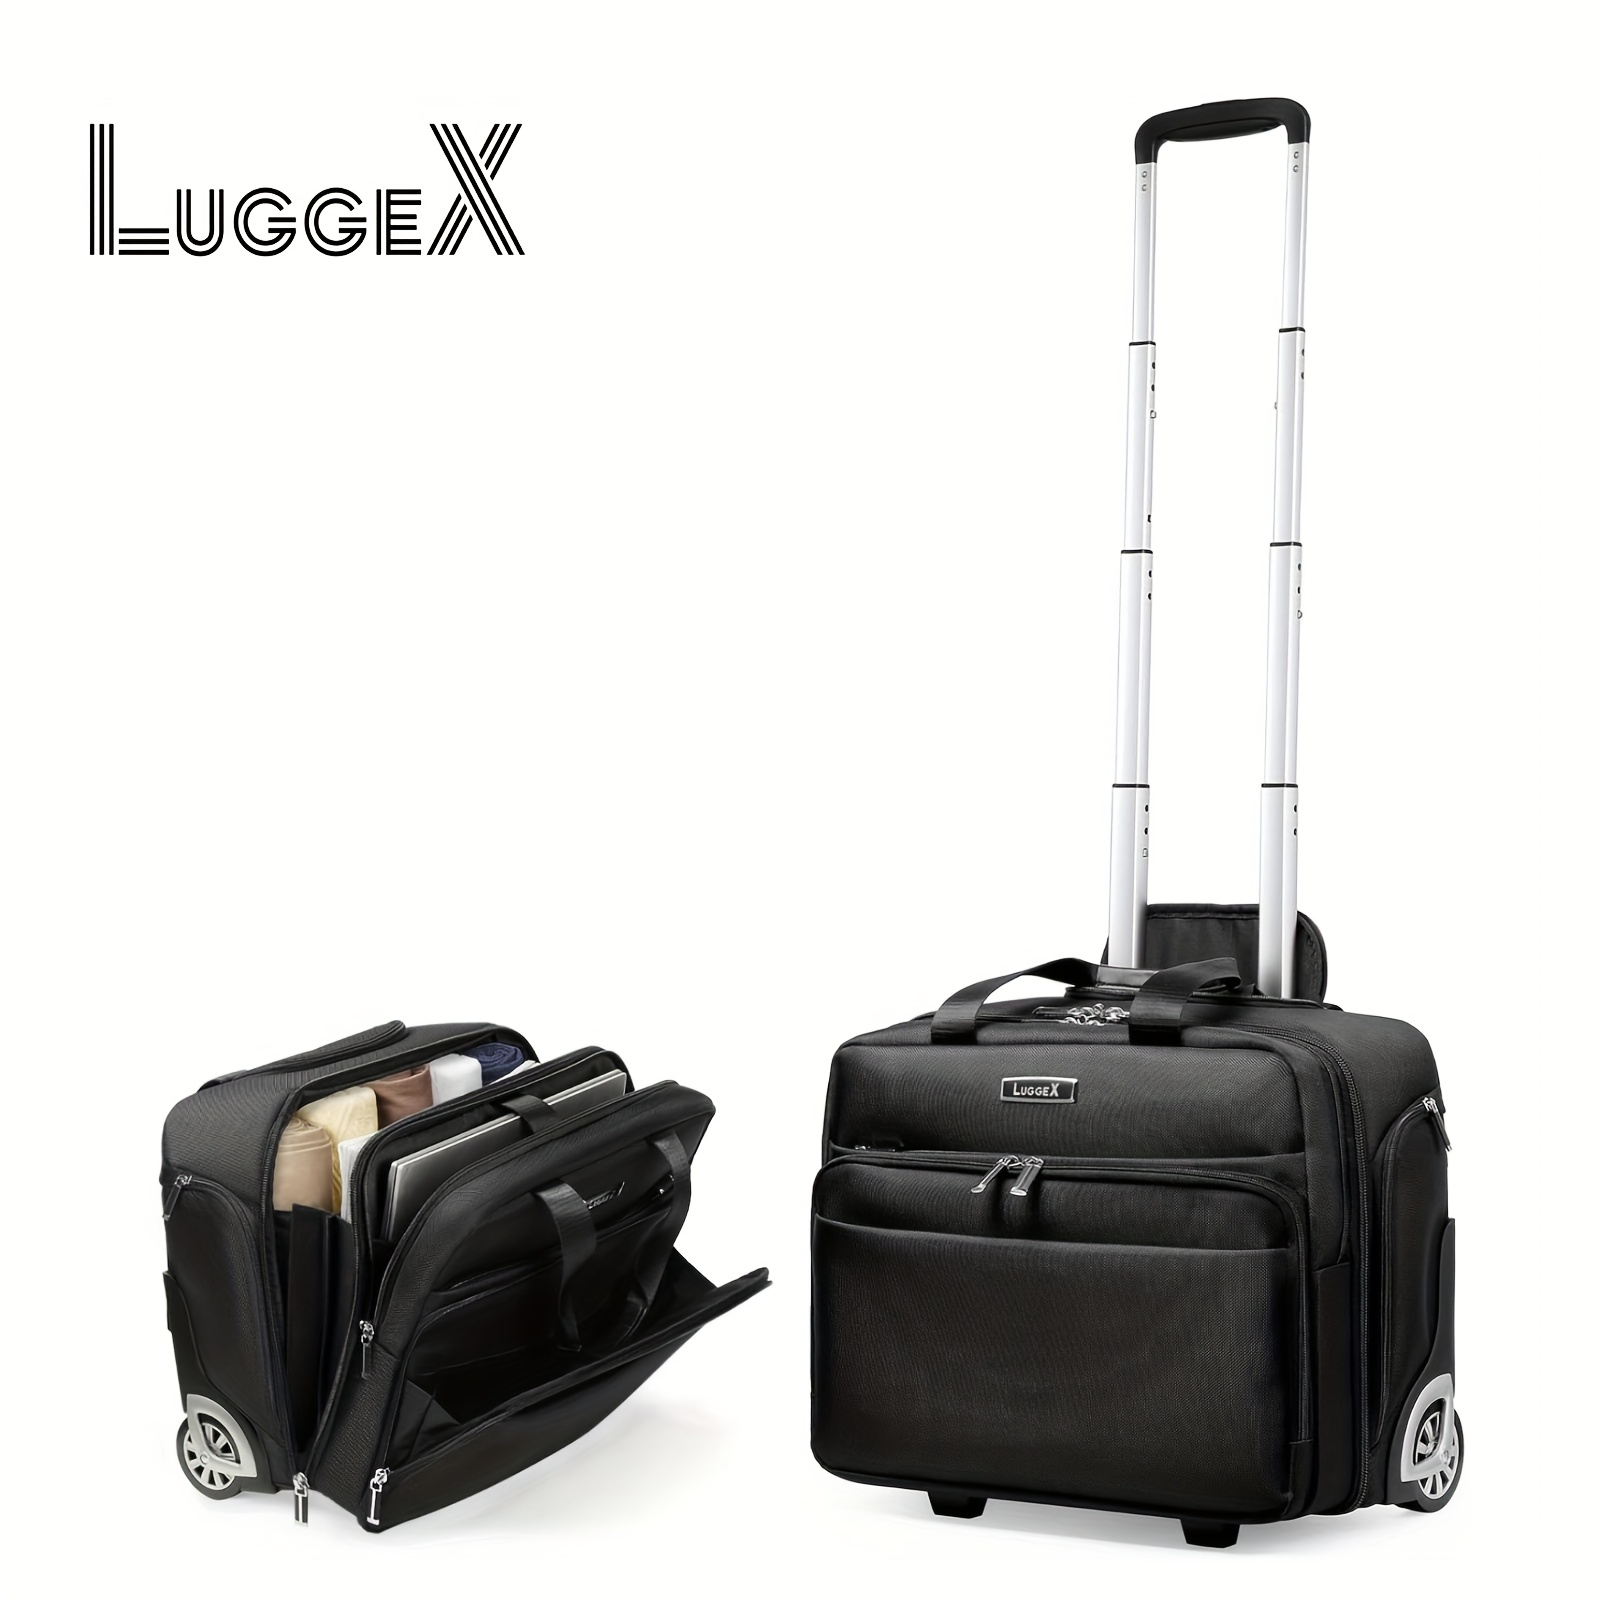 

Luggex Underseat Carry On Luggage With Wheels - 16 Inch Soft Sided Airline Approved Under Seat Luggage - Lightweight Overnight Suitcase (black)